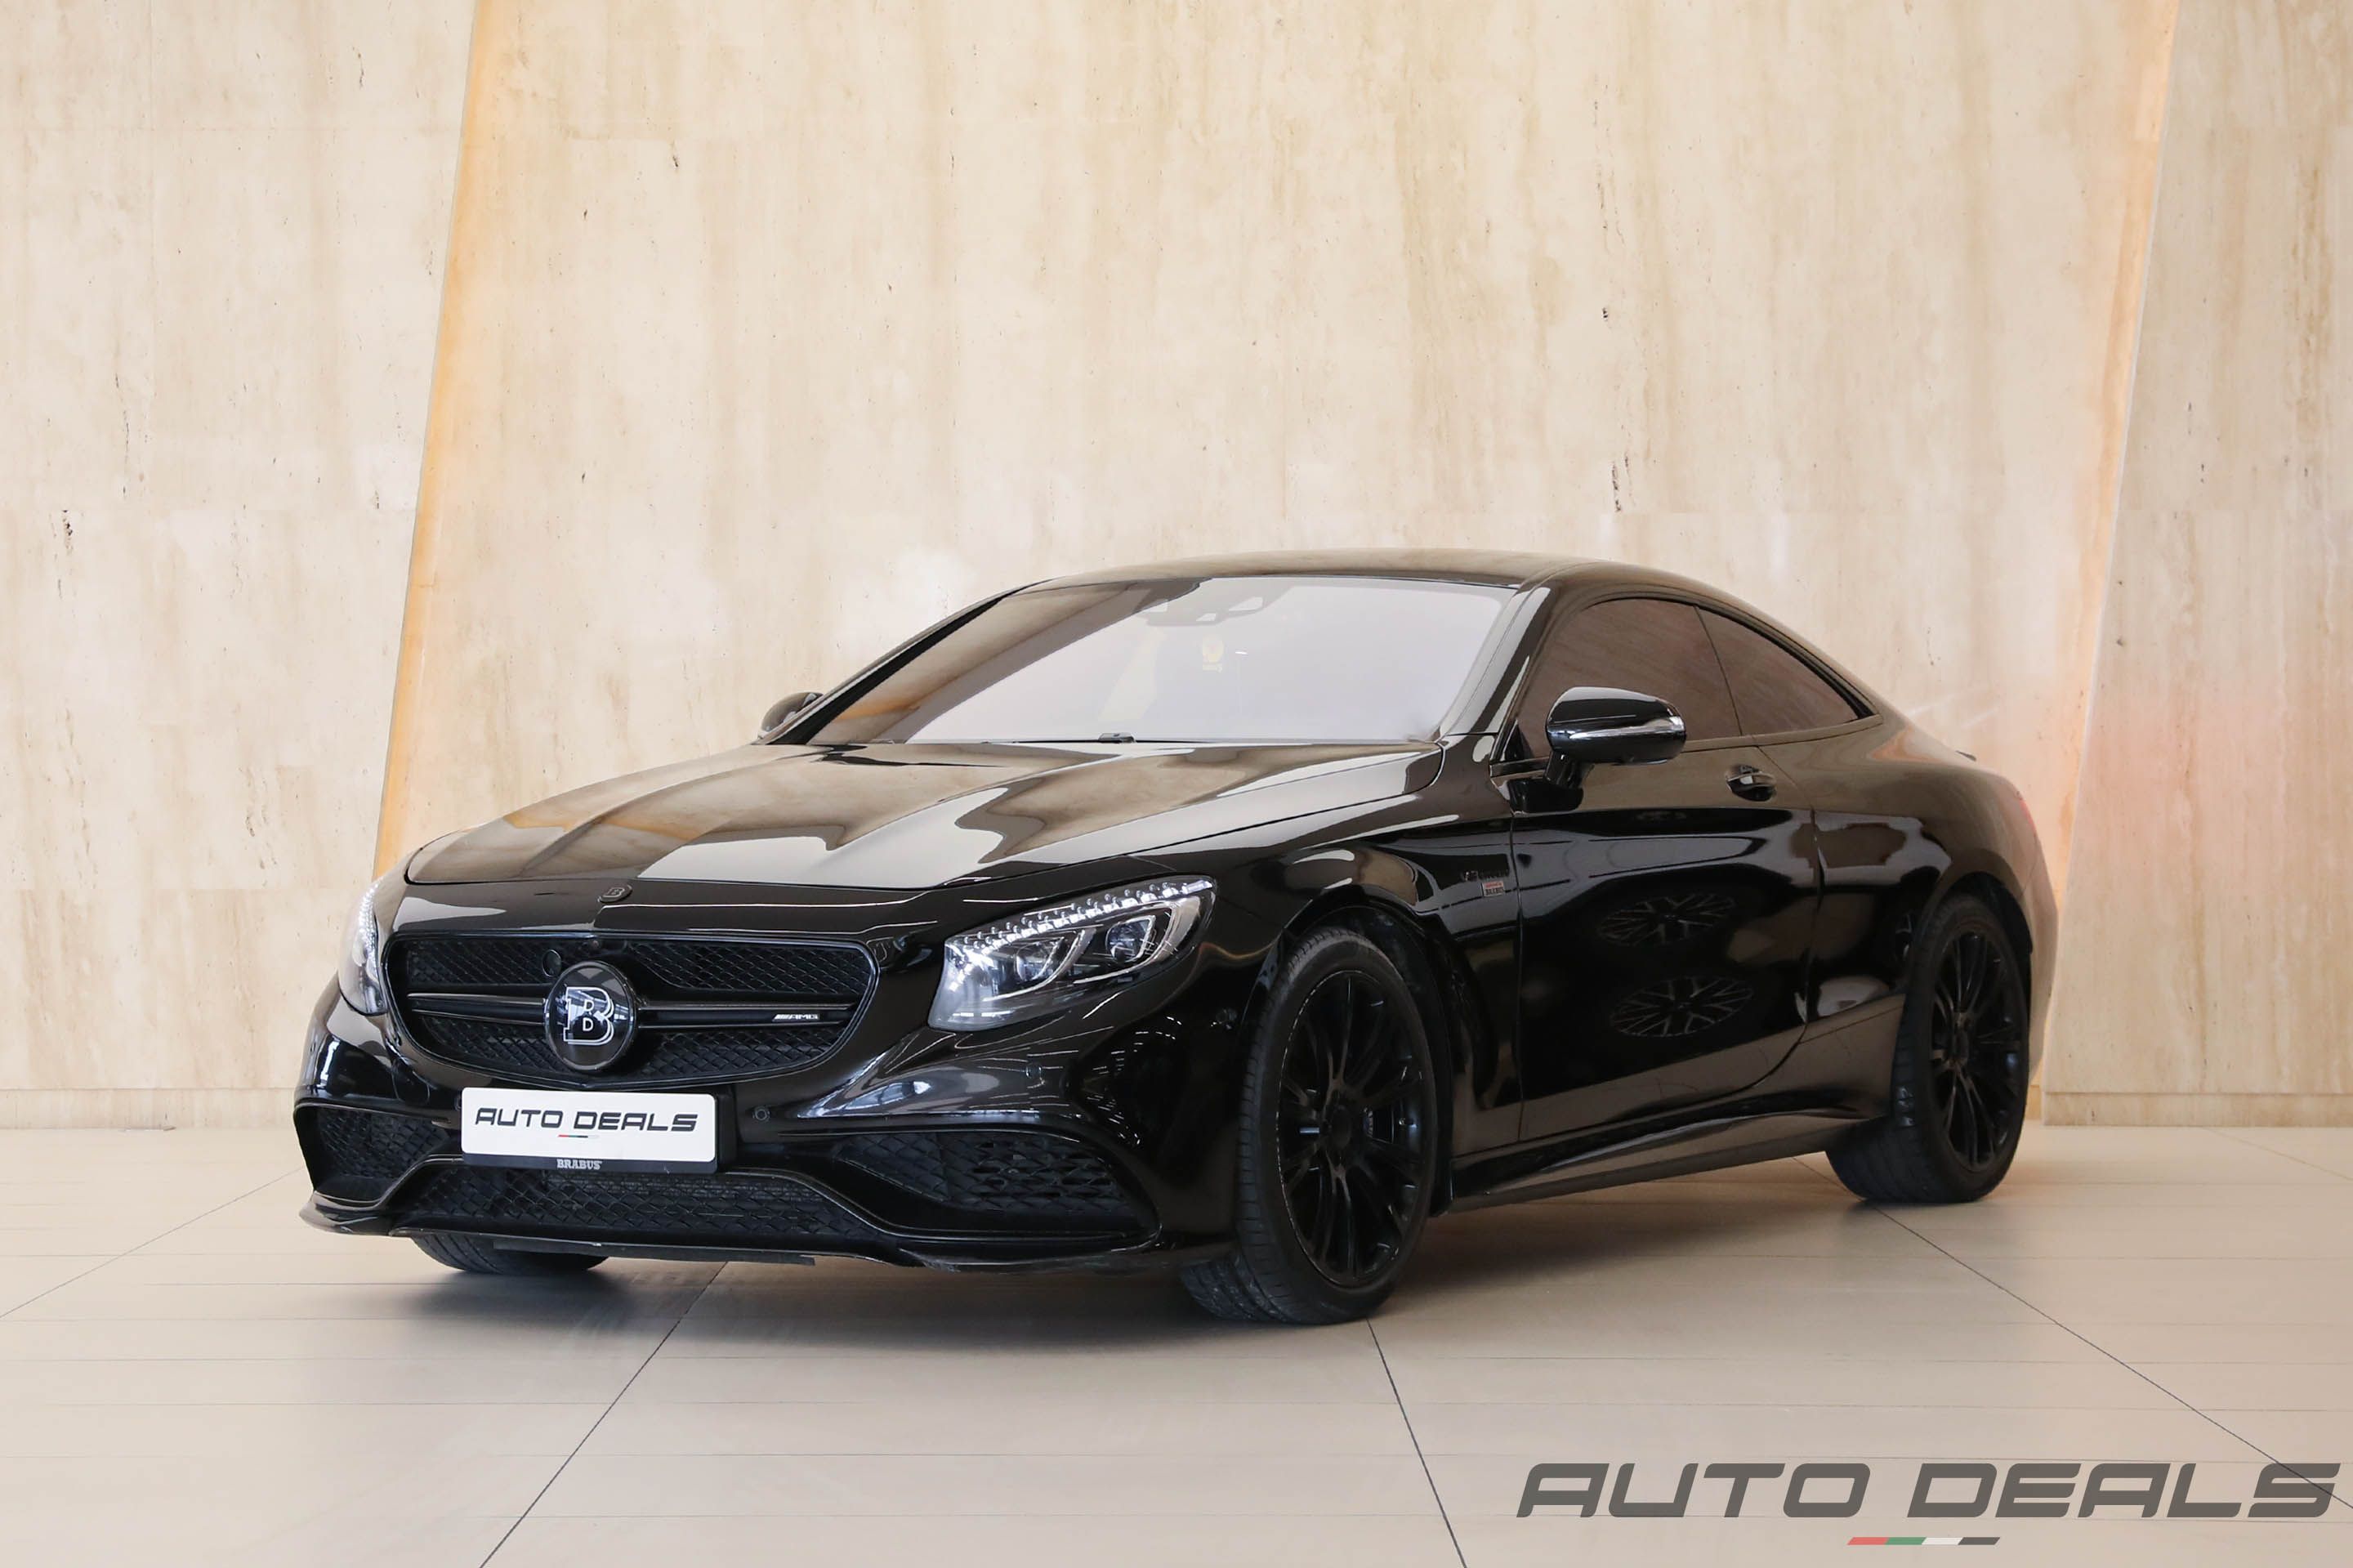 Mercedes Benz S63 AMG Brabus B63 | 2015 - Top of the Line - Excellent Condition | 6.0L V8